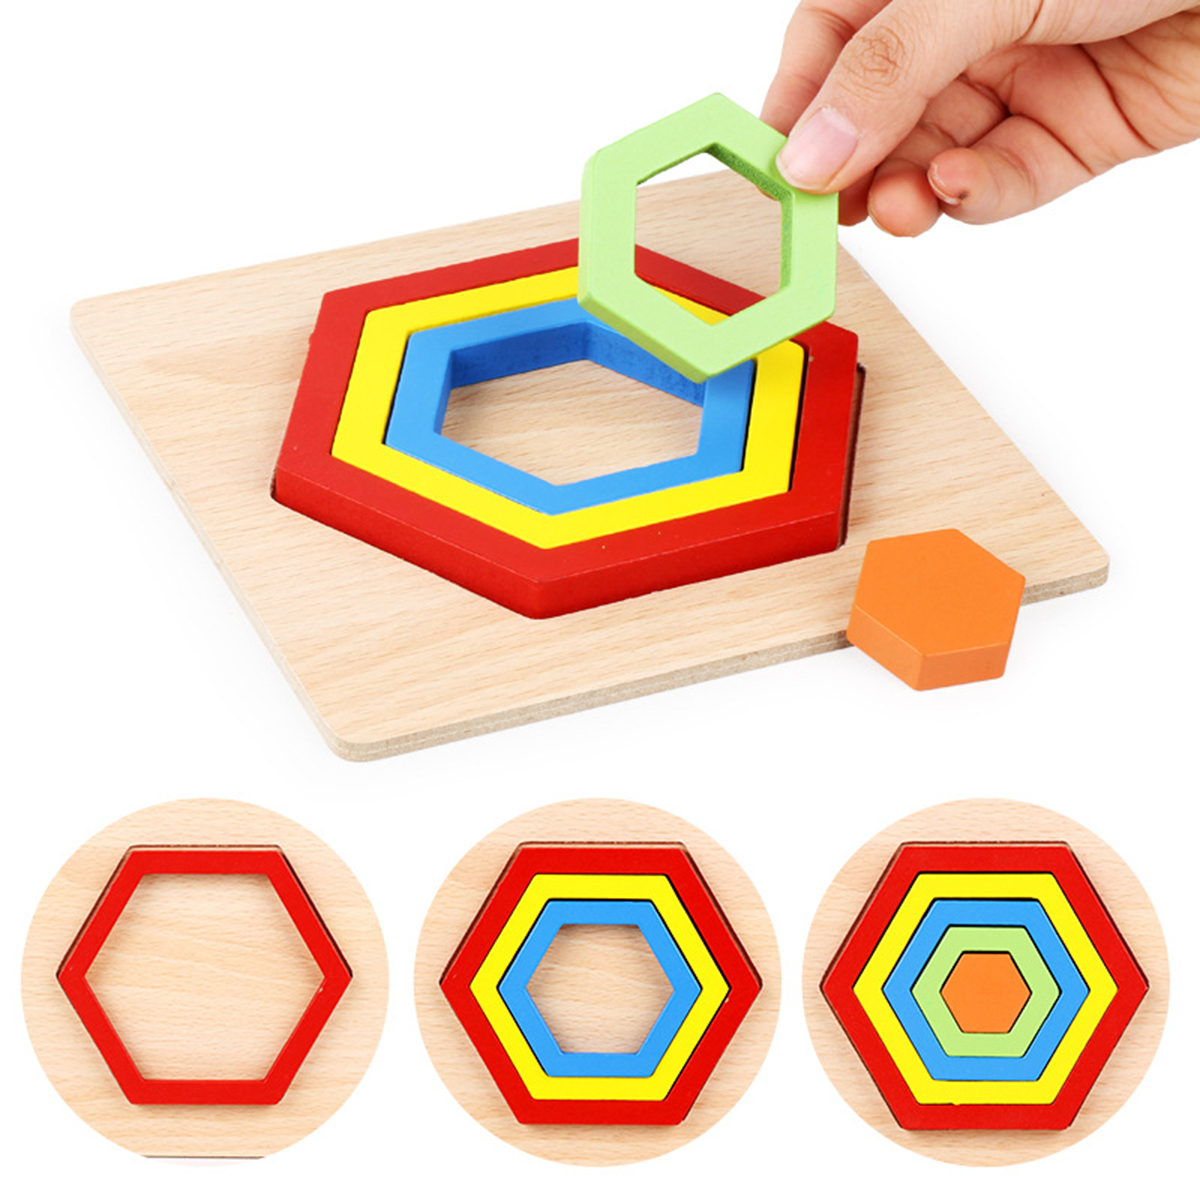 Shape Cognition Board Geometry Jigsaw Puzzle Wooden Kids Educational Learning Toys 10